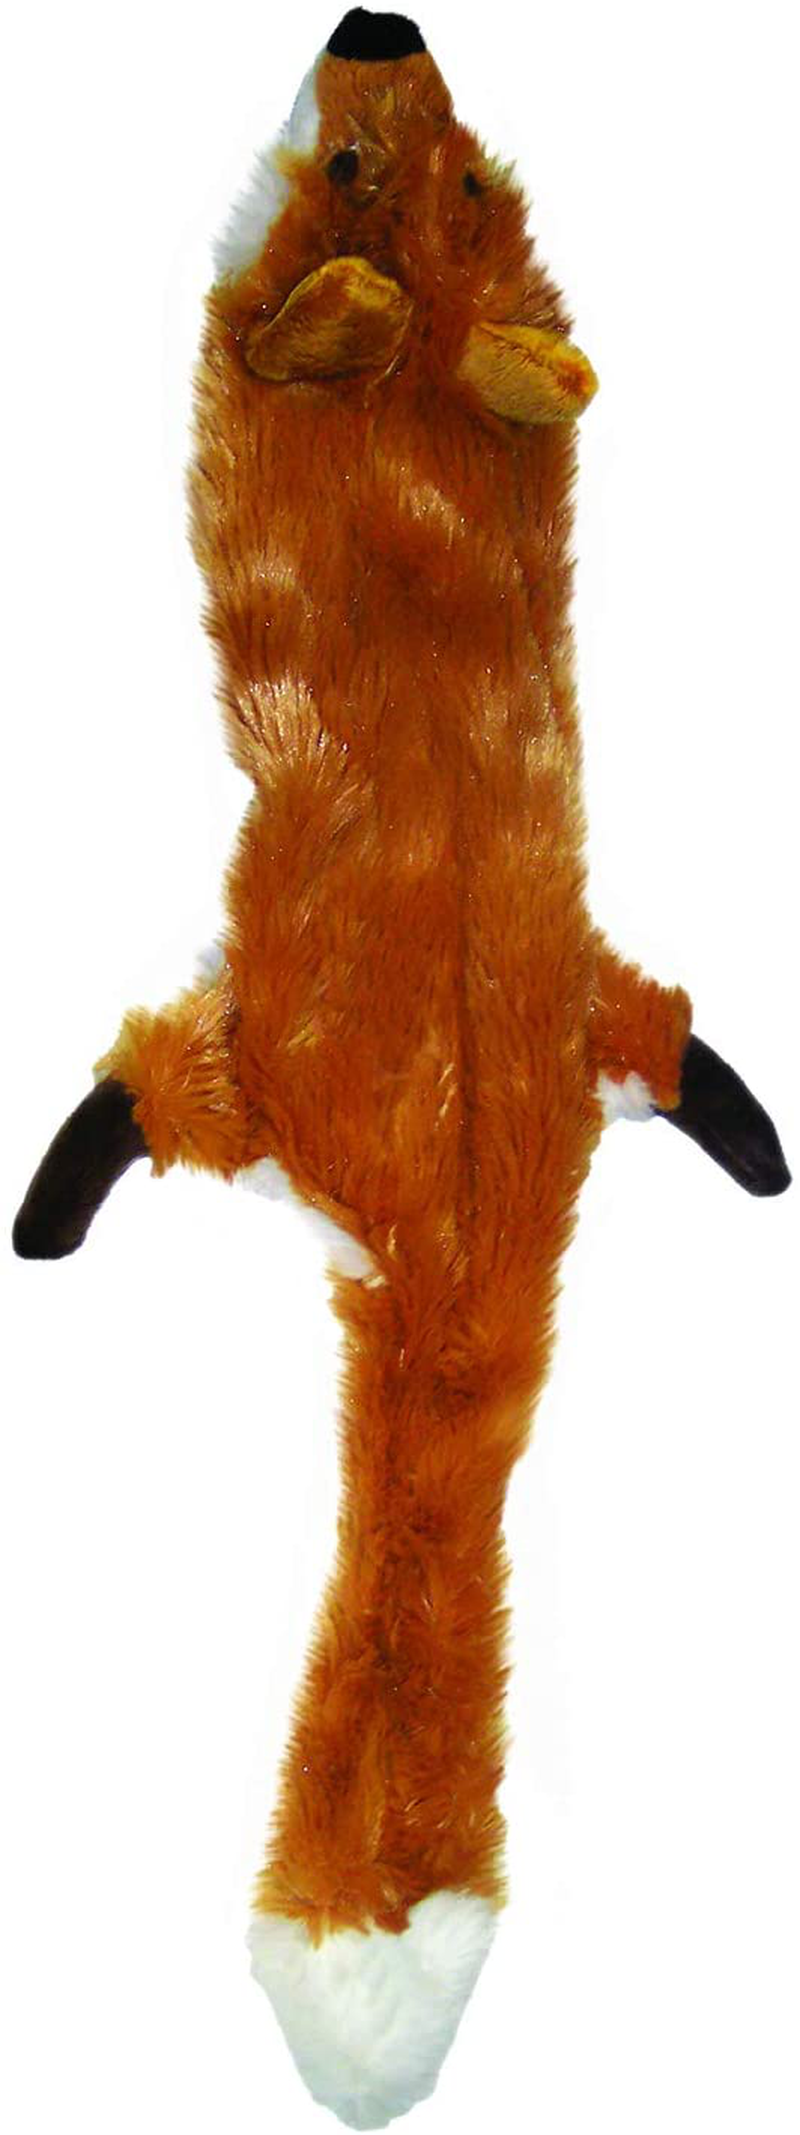 SPOT Skinneeez | Stuffless Dog Toy with Squeaker for All Dogs | Tug-Of-War Toy for Small and Large Breeds | 23" | Fox Design | by Ethical Pet Animals & Pet Supplies > Pet Supplies > Dog Supplies > Dog Toys Ethical Products   